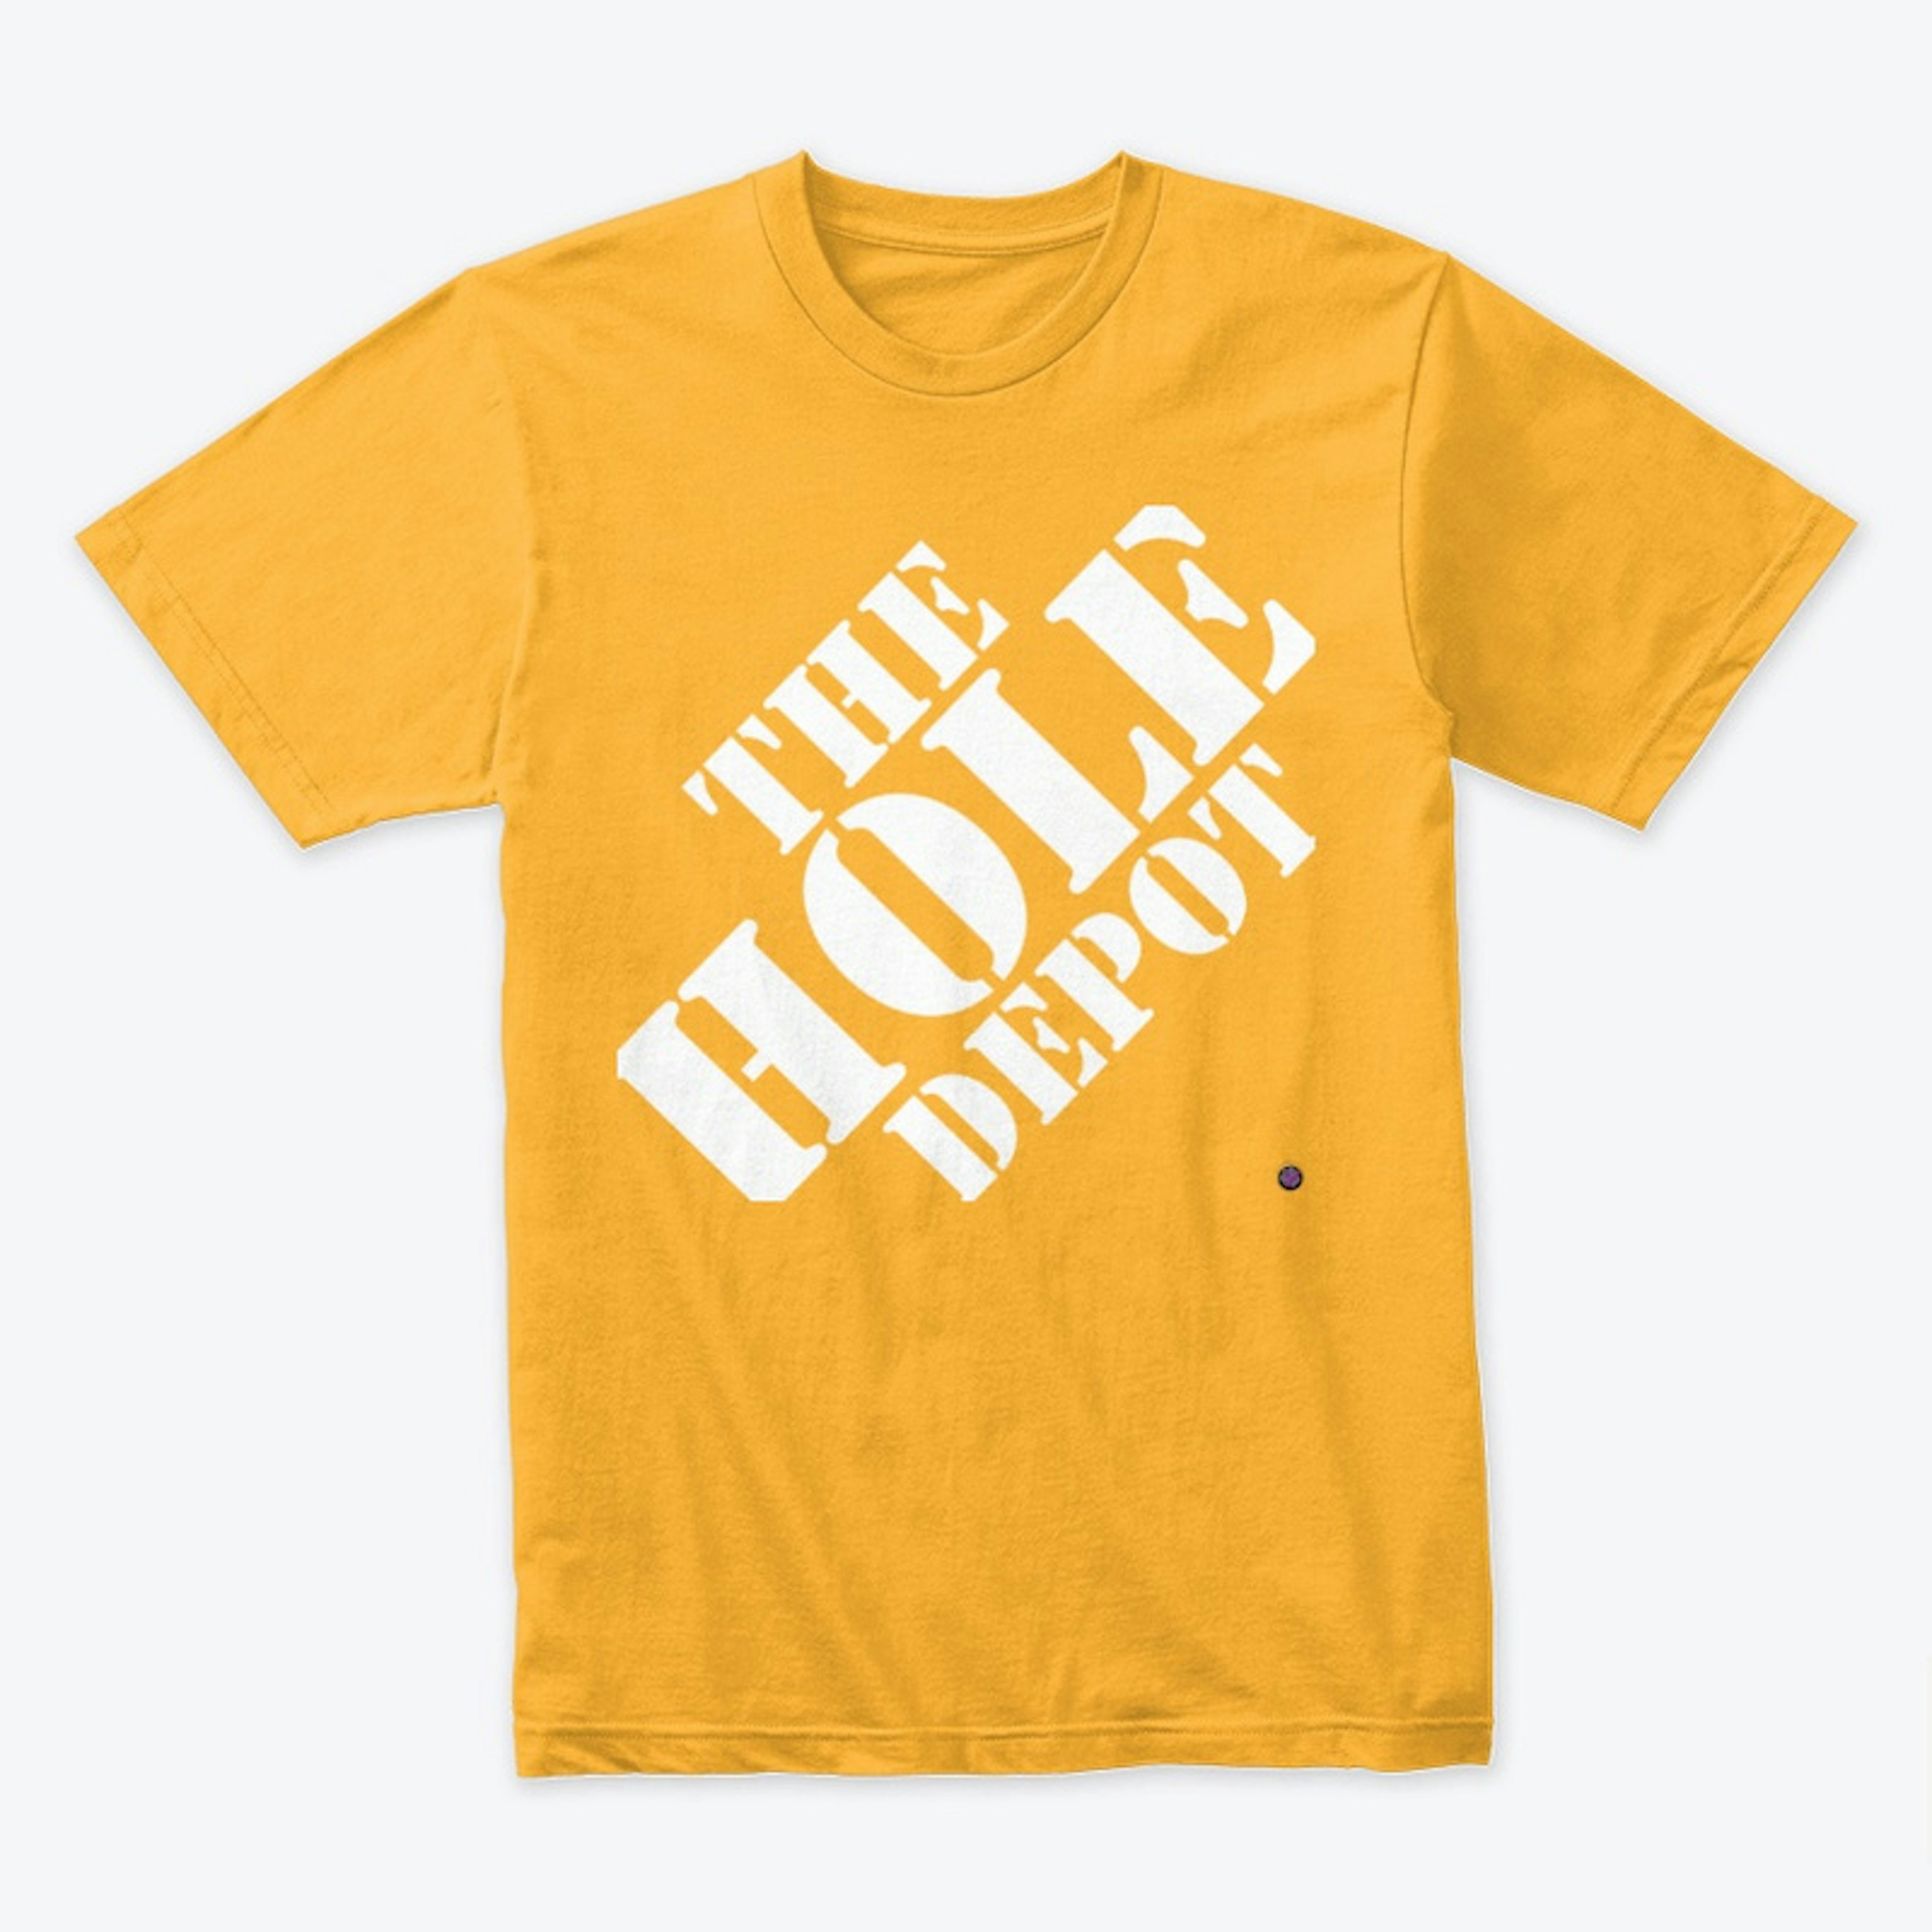 The Hole Depot